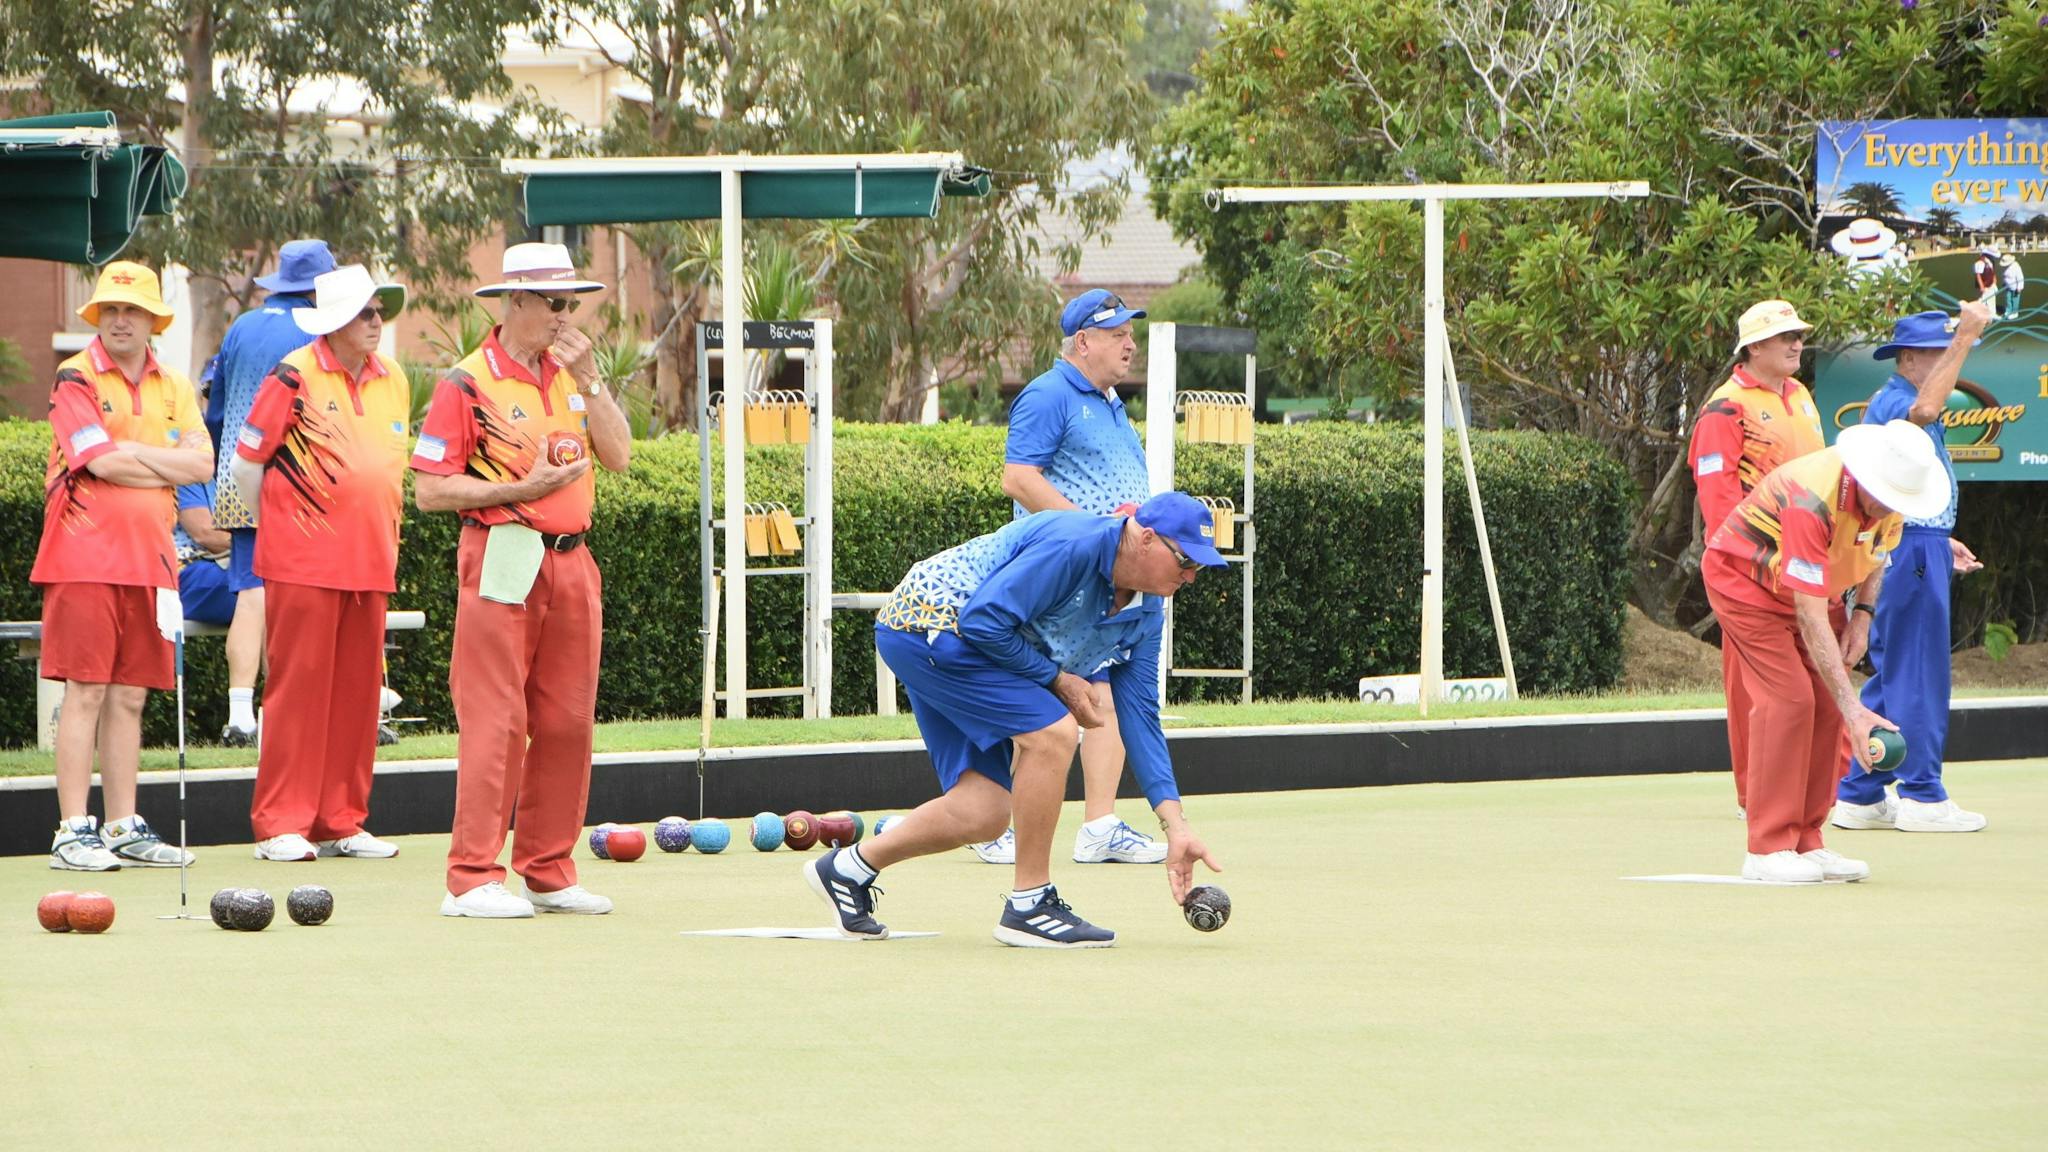 Bowling on the Greens